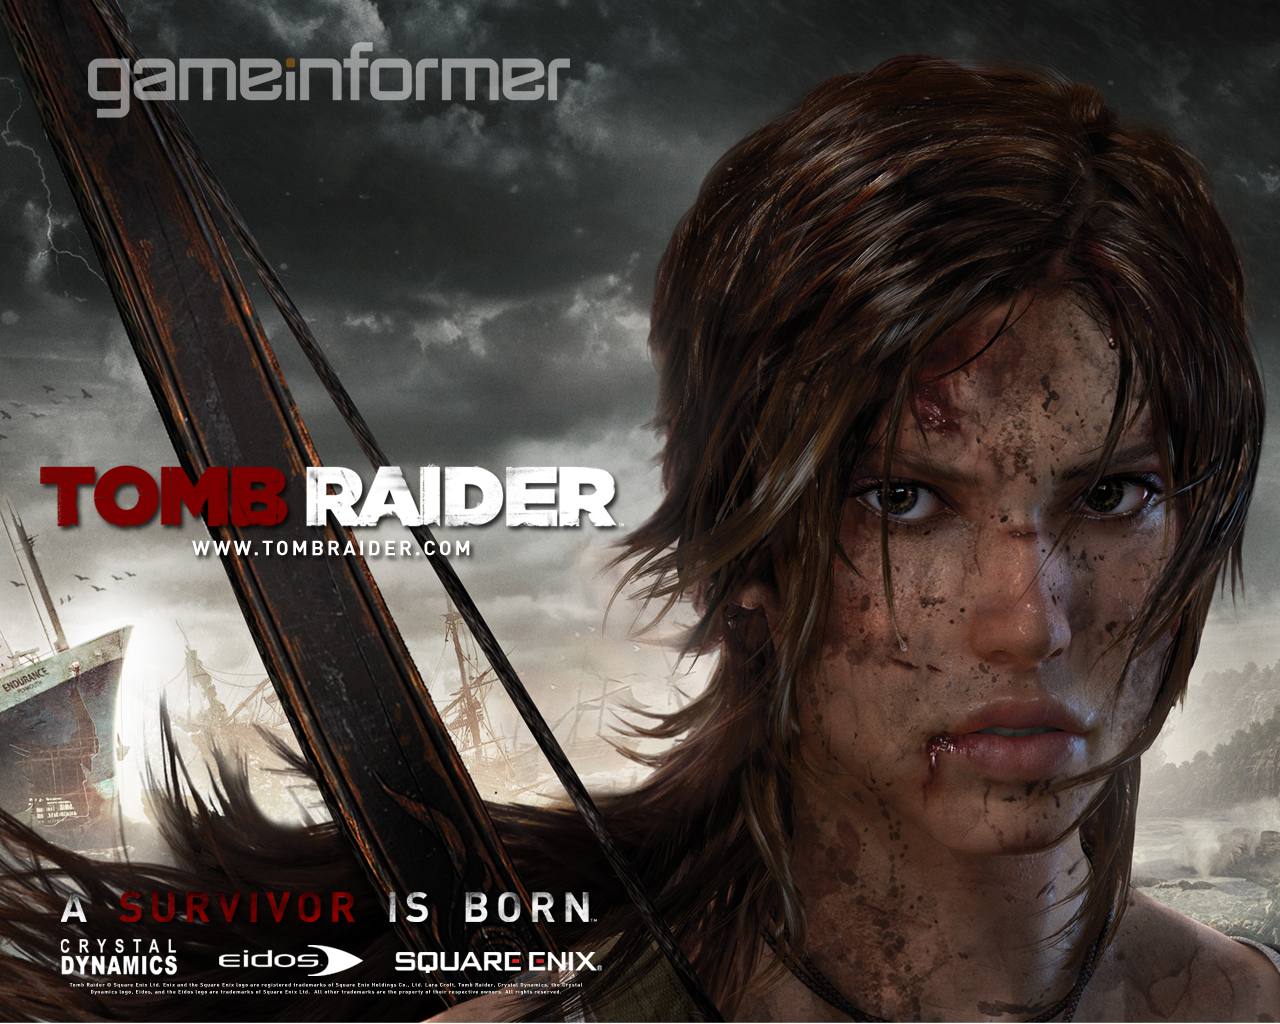 Media asset in full size related to 3dfxzone.it news item entitled as follows: Square Enix pubblica tre wallpaper del nuovo Tomb Raider | Image Name: news14411_1.jpg